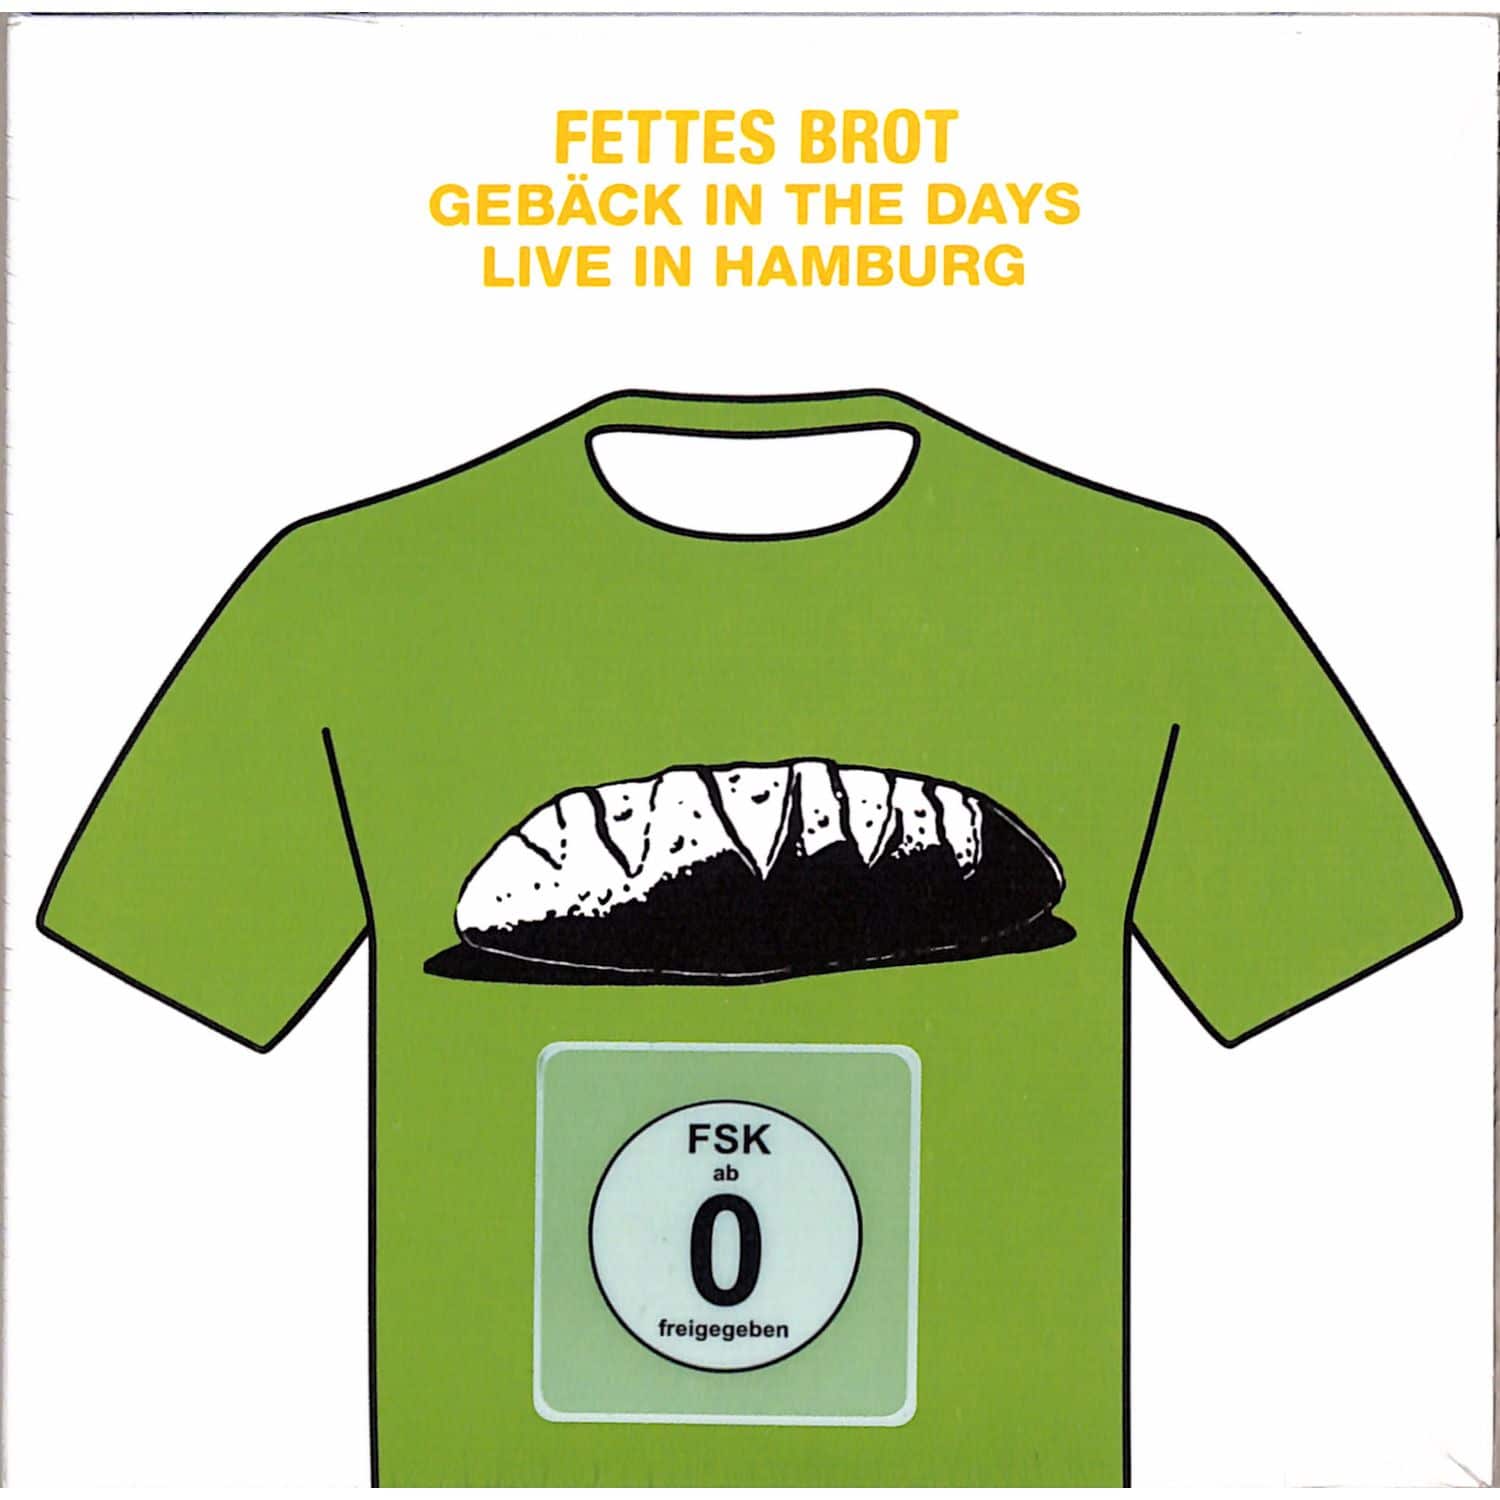 Fettes Brot - GEBAECK IN THE DAYS - LIVE IN HAMBURG 2016 